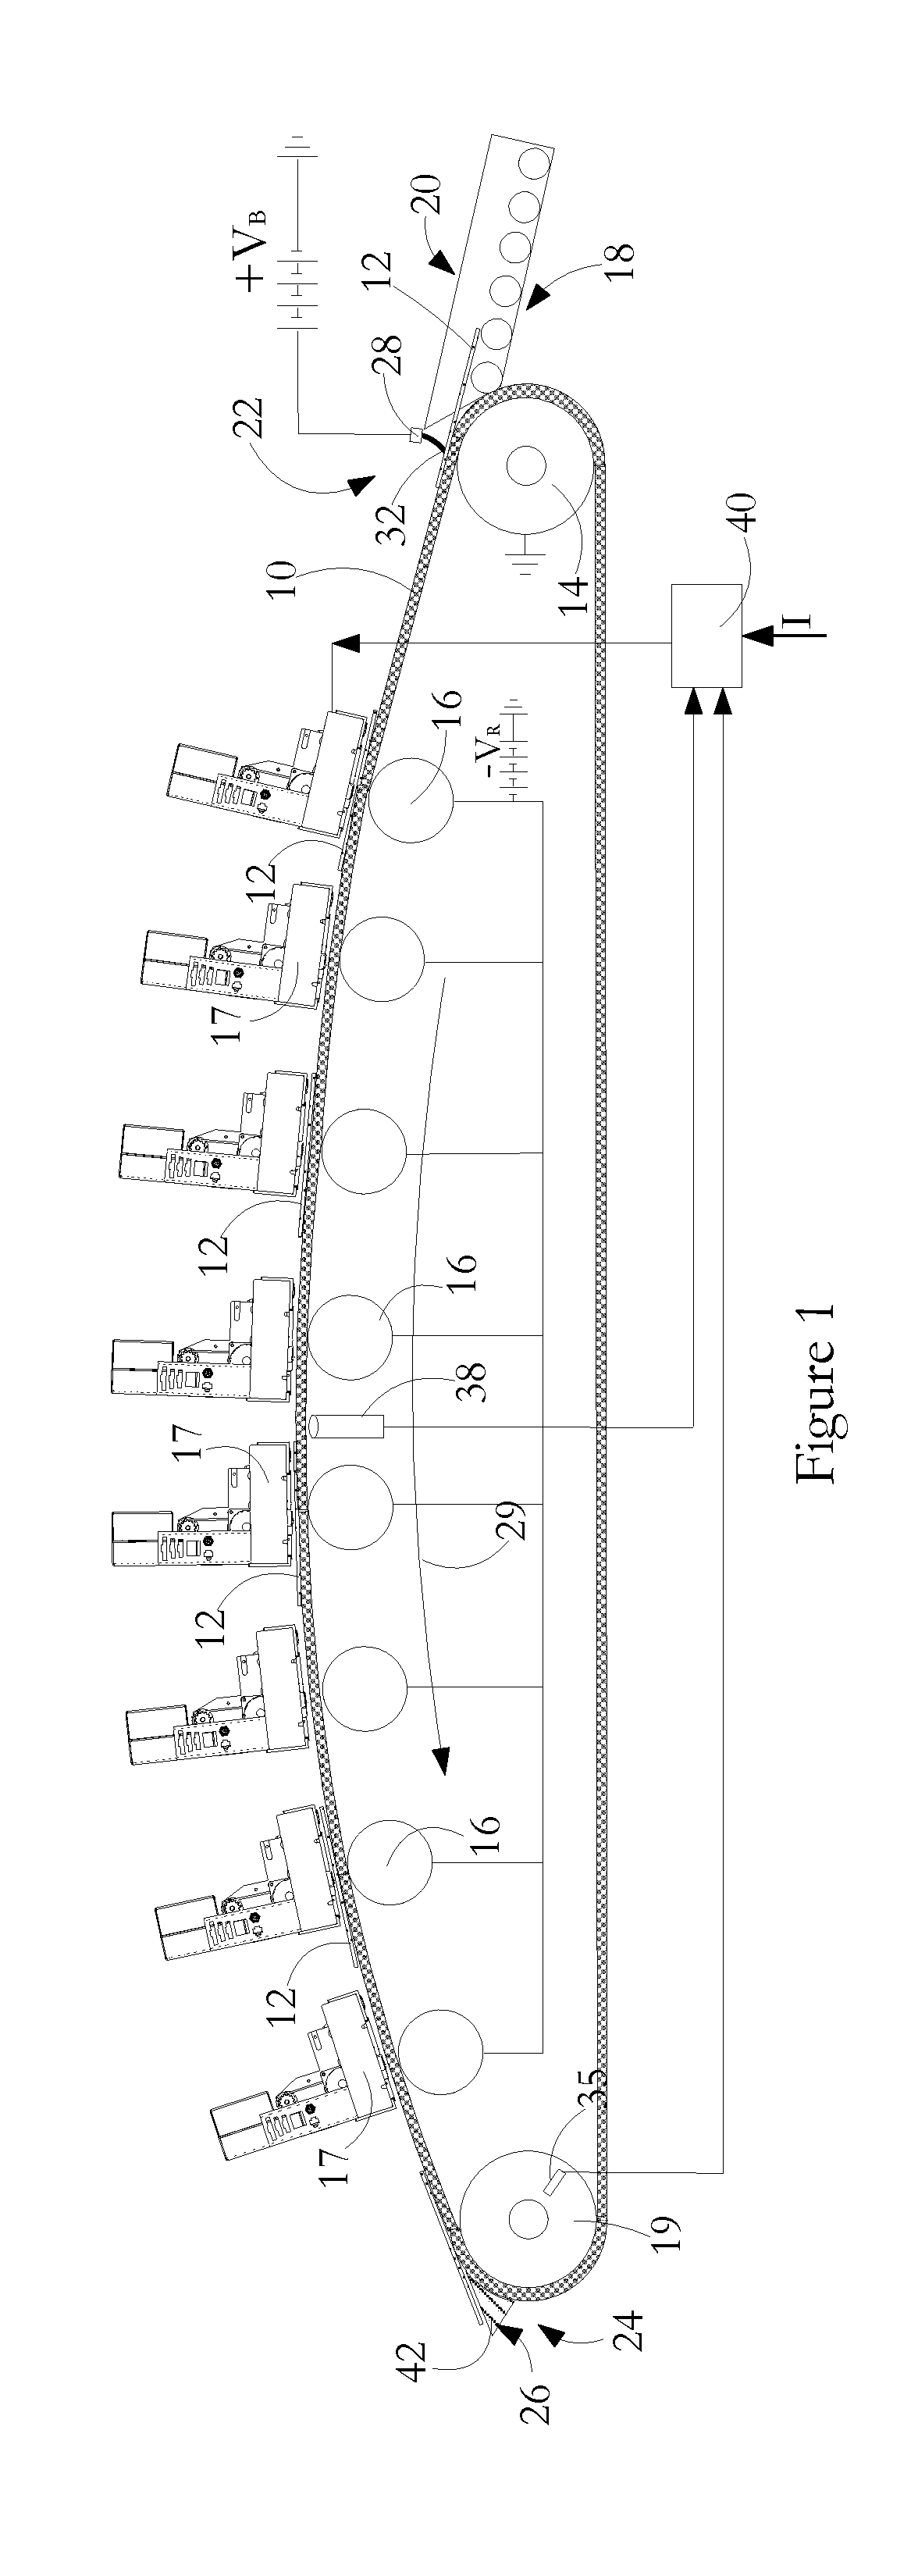 Multiple print head printing apparatus and method of operation